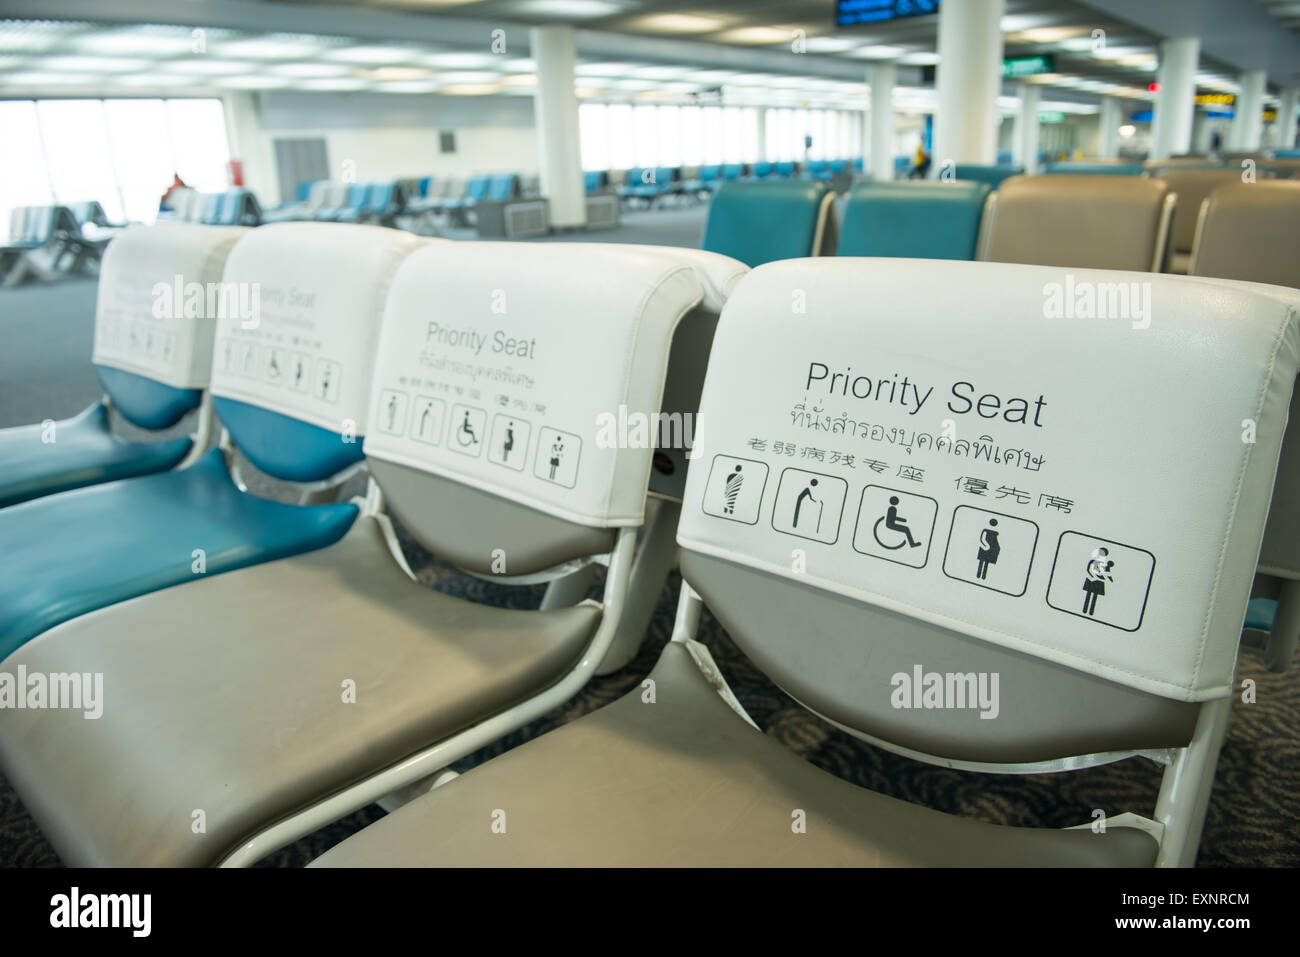 priority seat in the airport Stock Photo